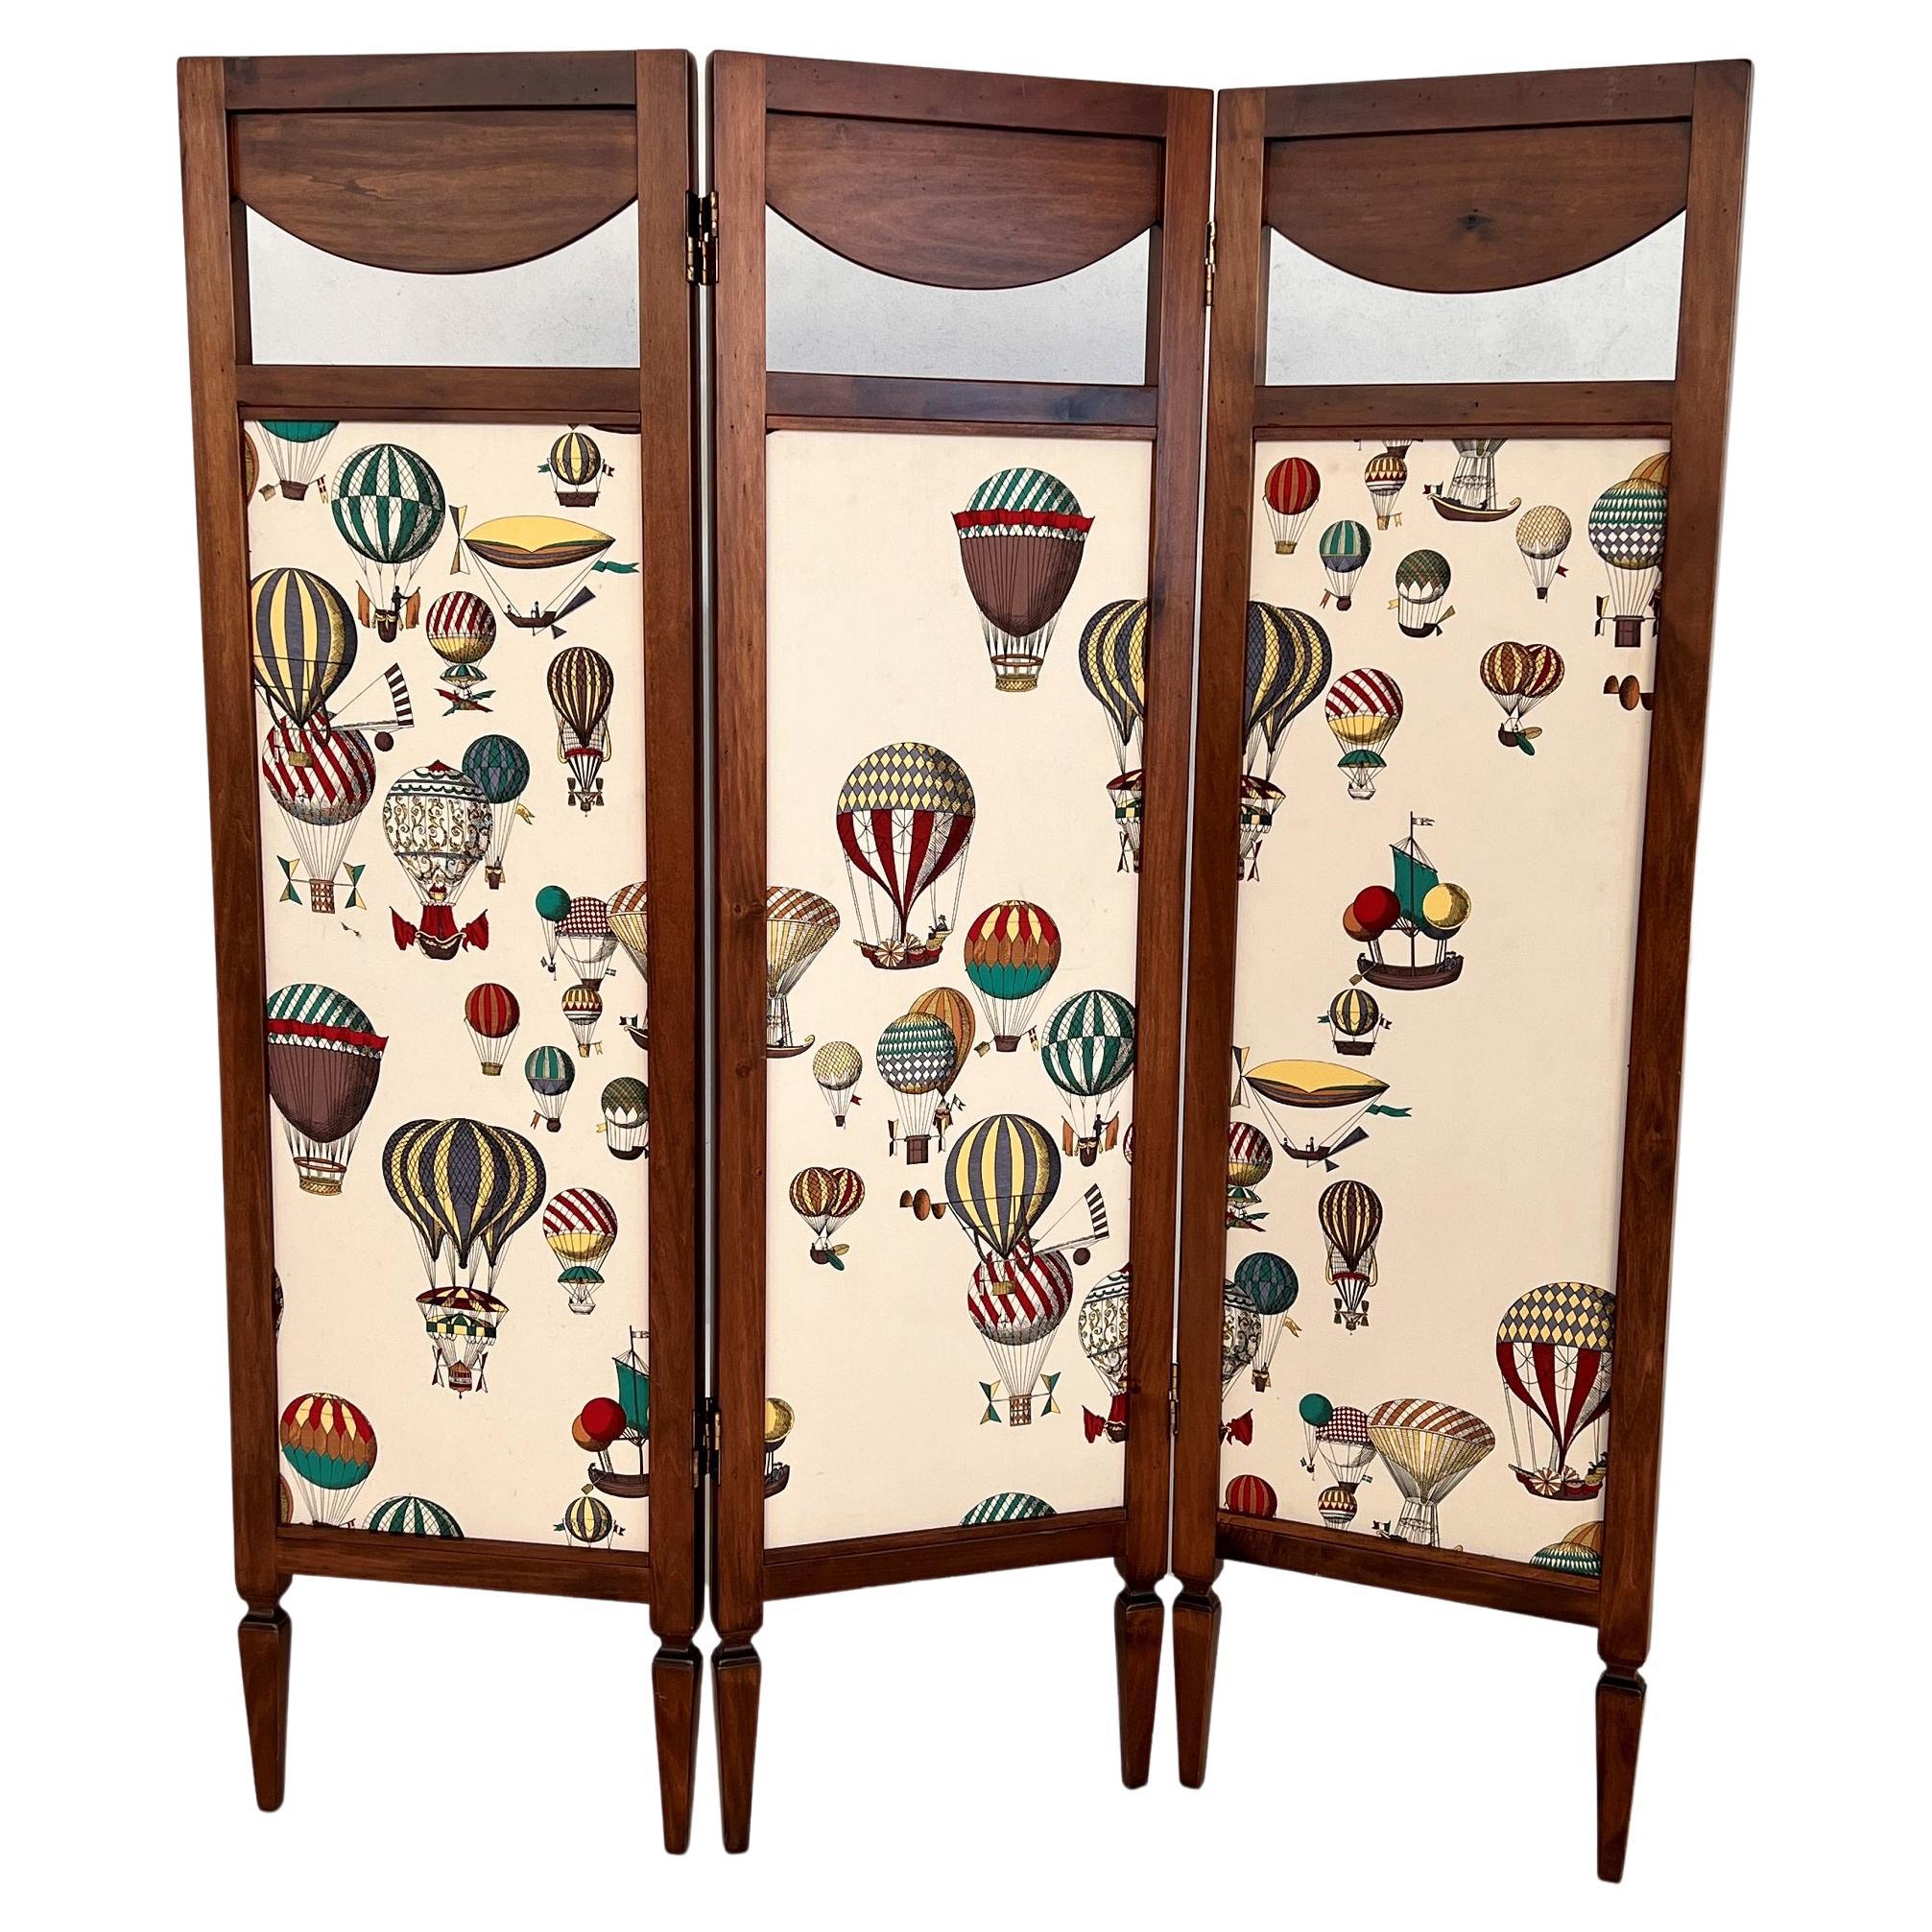 Italian Midcentury Folding Screen Room Divider Paravent with Fornasetti Fabric